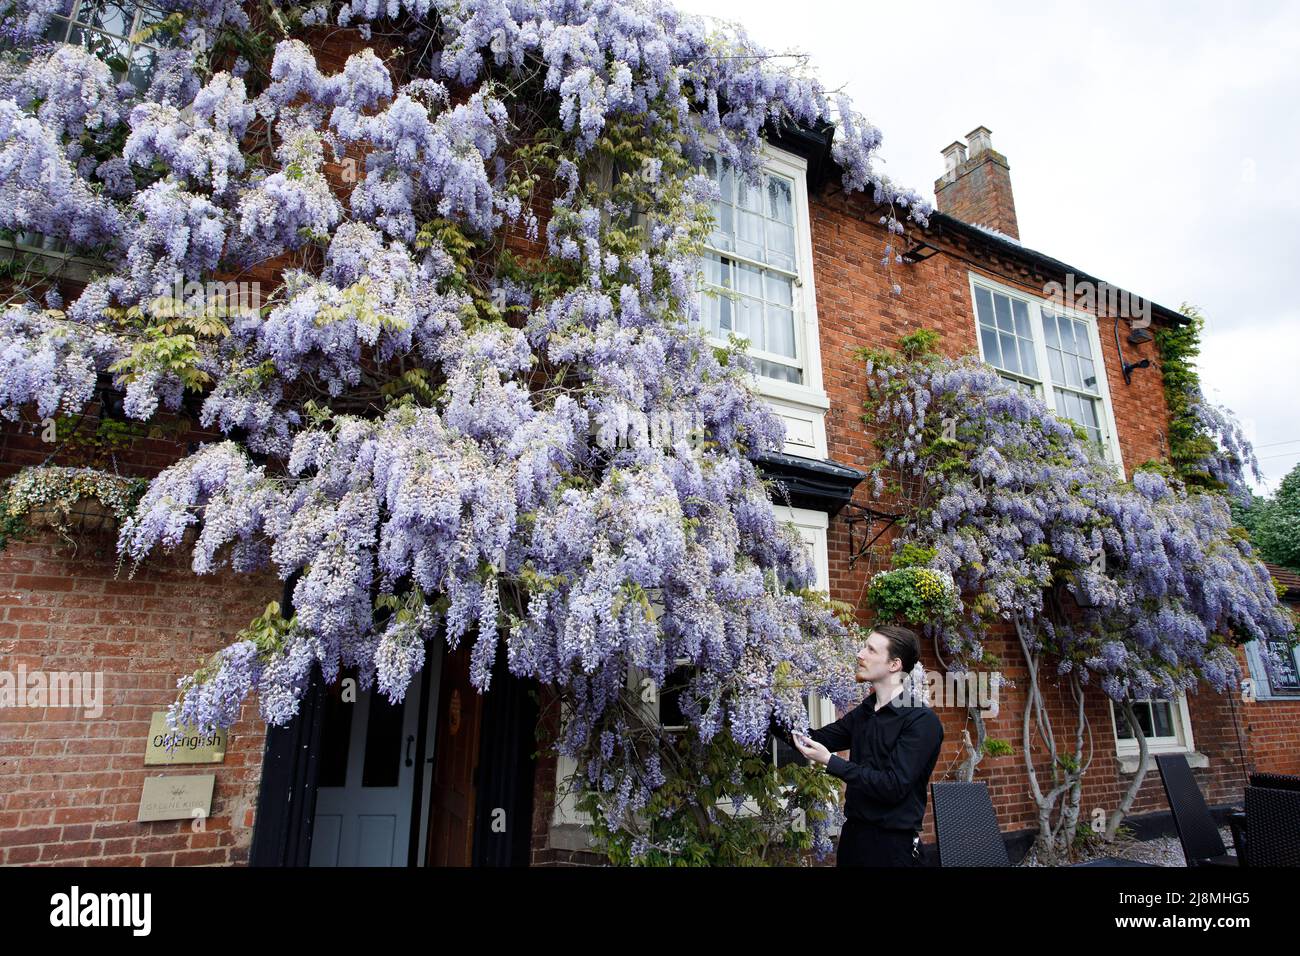 A huge wisteria covering the frontage of the Pen and Parchment public house in the centre of Stratford upon Avon. Picture shows Zebadiah Fensom who works in the public house happily posing with the wisteria. The public house sits opposite the Royal Shakespeare Theatre near the river. It is a Greene King pub. Stock Photo